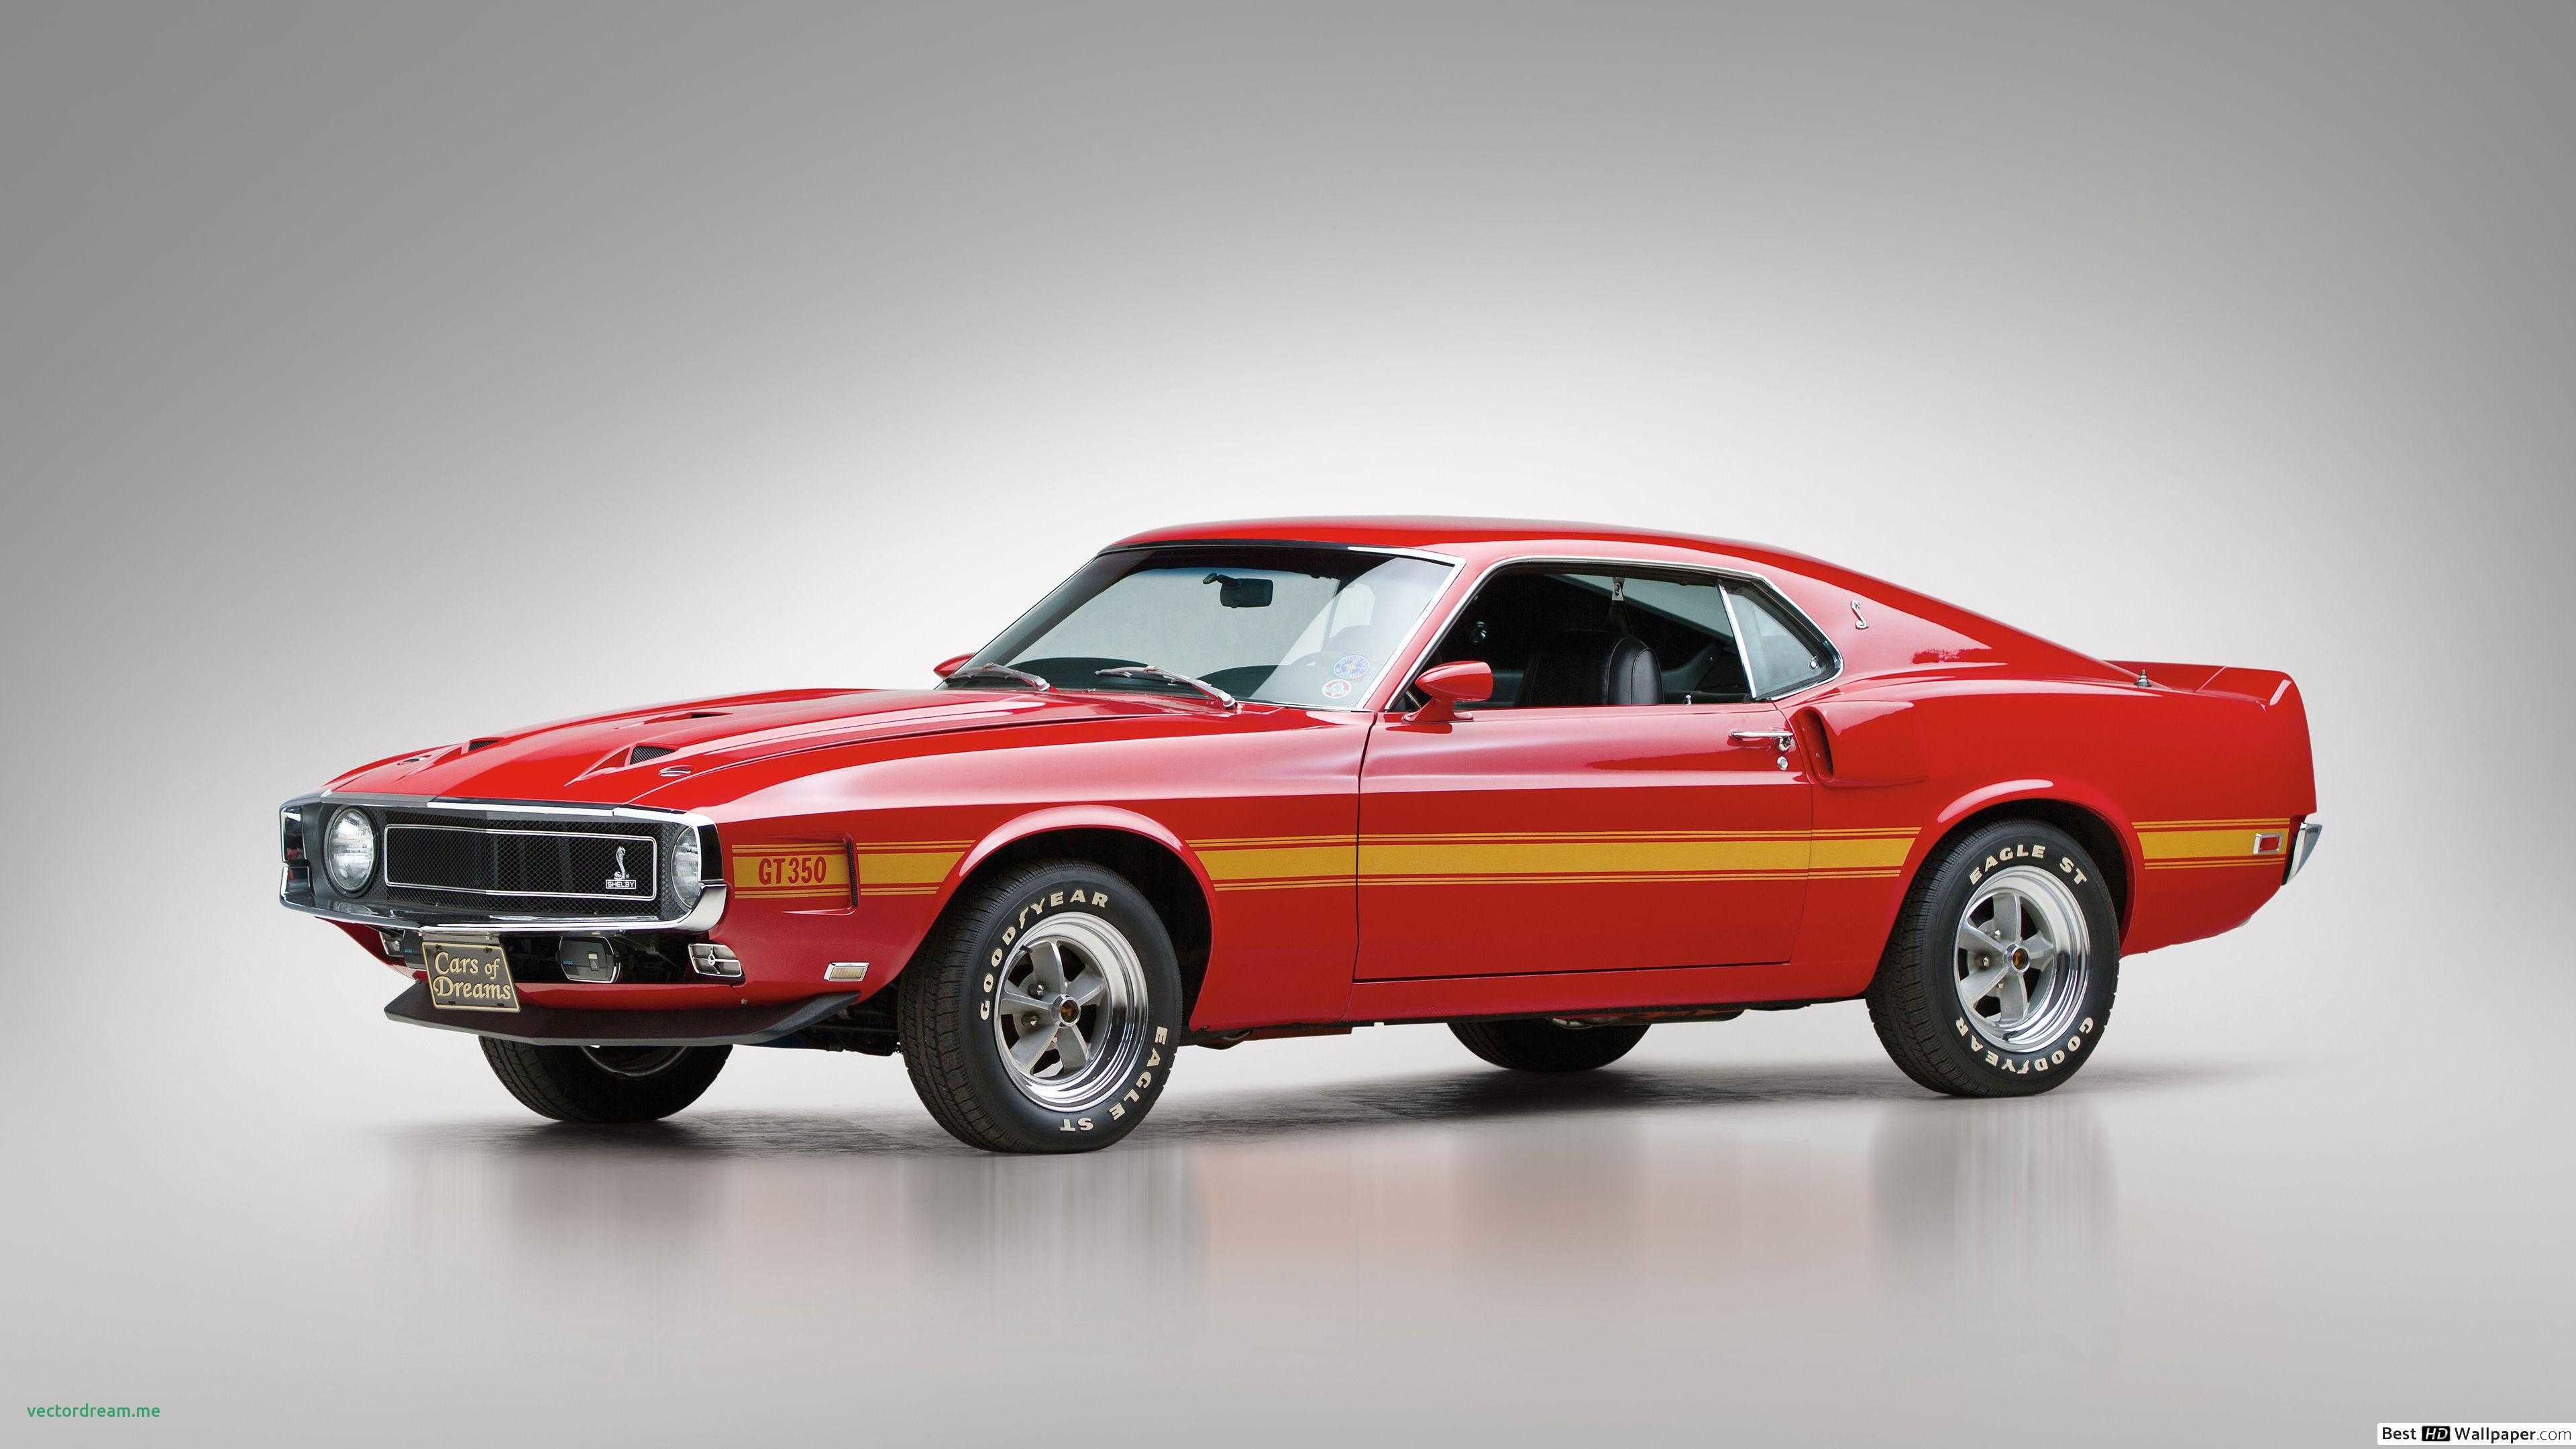 3840x2160 Vintage Car Hd Wallpapers Unique Red ford Shelby Gt350 Hd Wallpaper